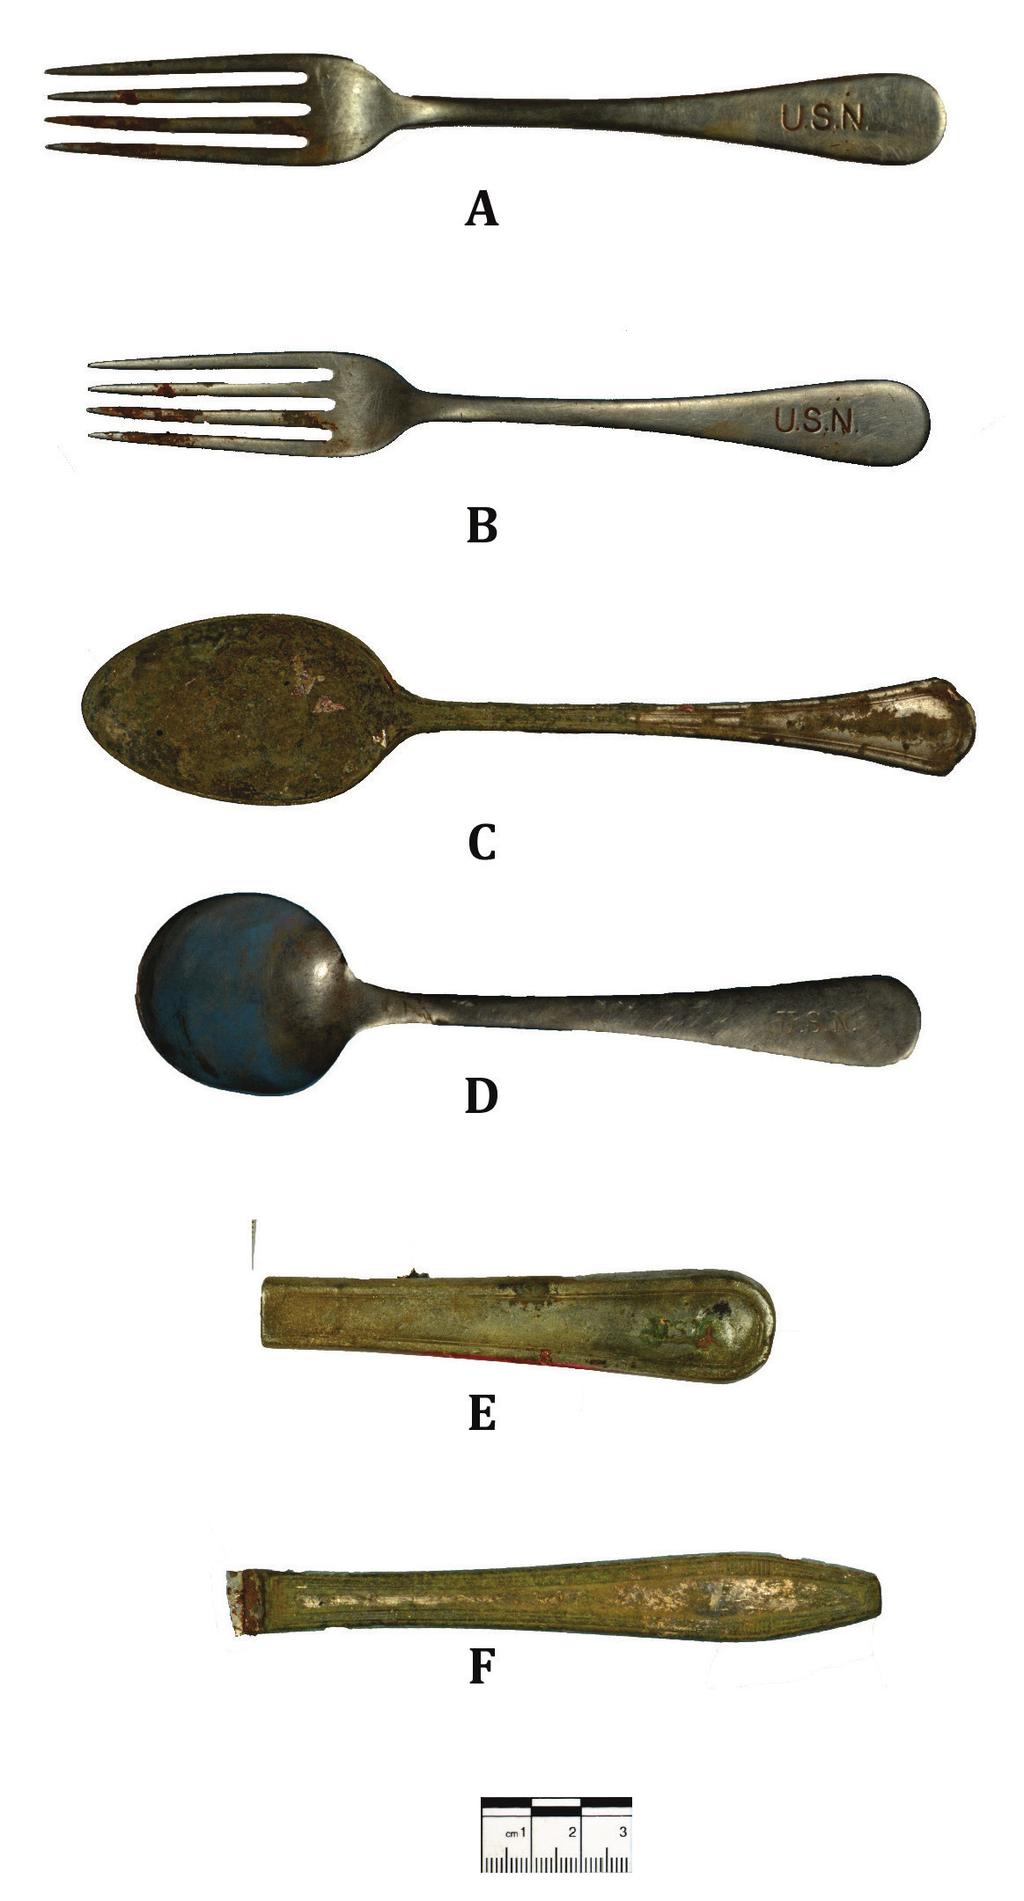 ANALYSIS OF 540R660 Figure 14. Utensils recovered from 540R660. A-B, stainless steel forks for enlisted use, stamped U.S.N. ; B, silver plated oval soup spoon for officers use, stamped U.S.N. ; C, stainless steel round soup spoon for enlisted use, stamped U.